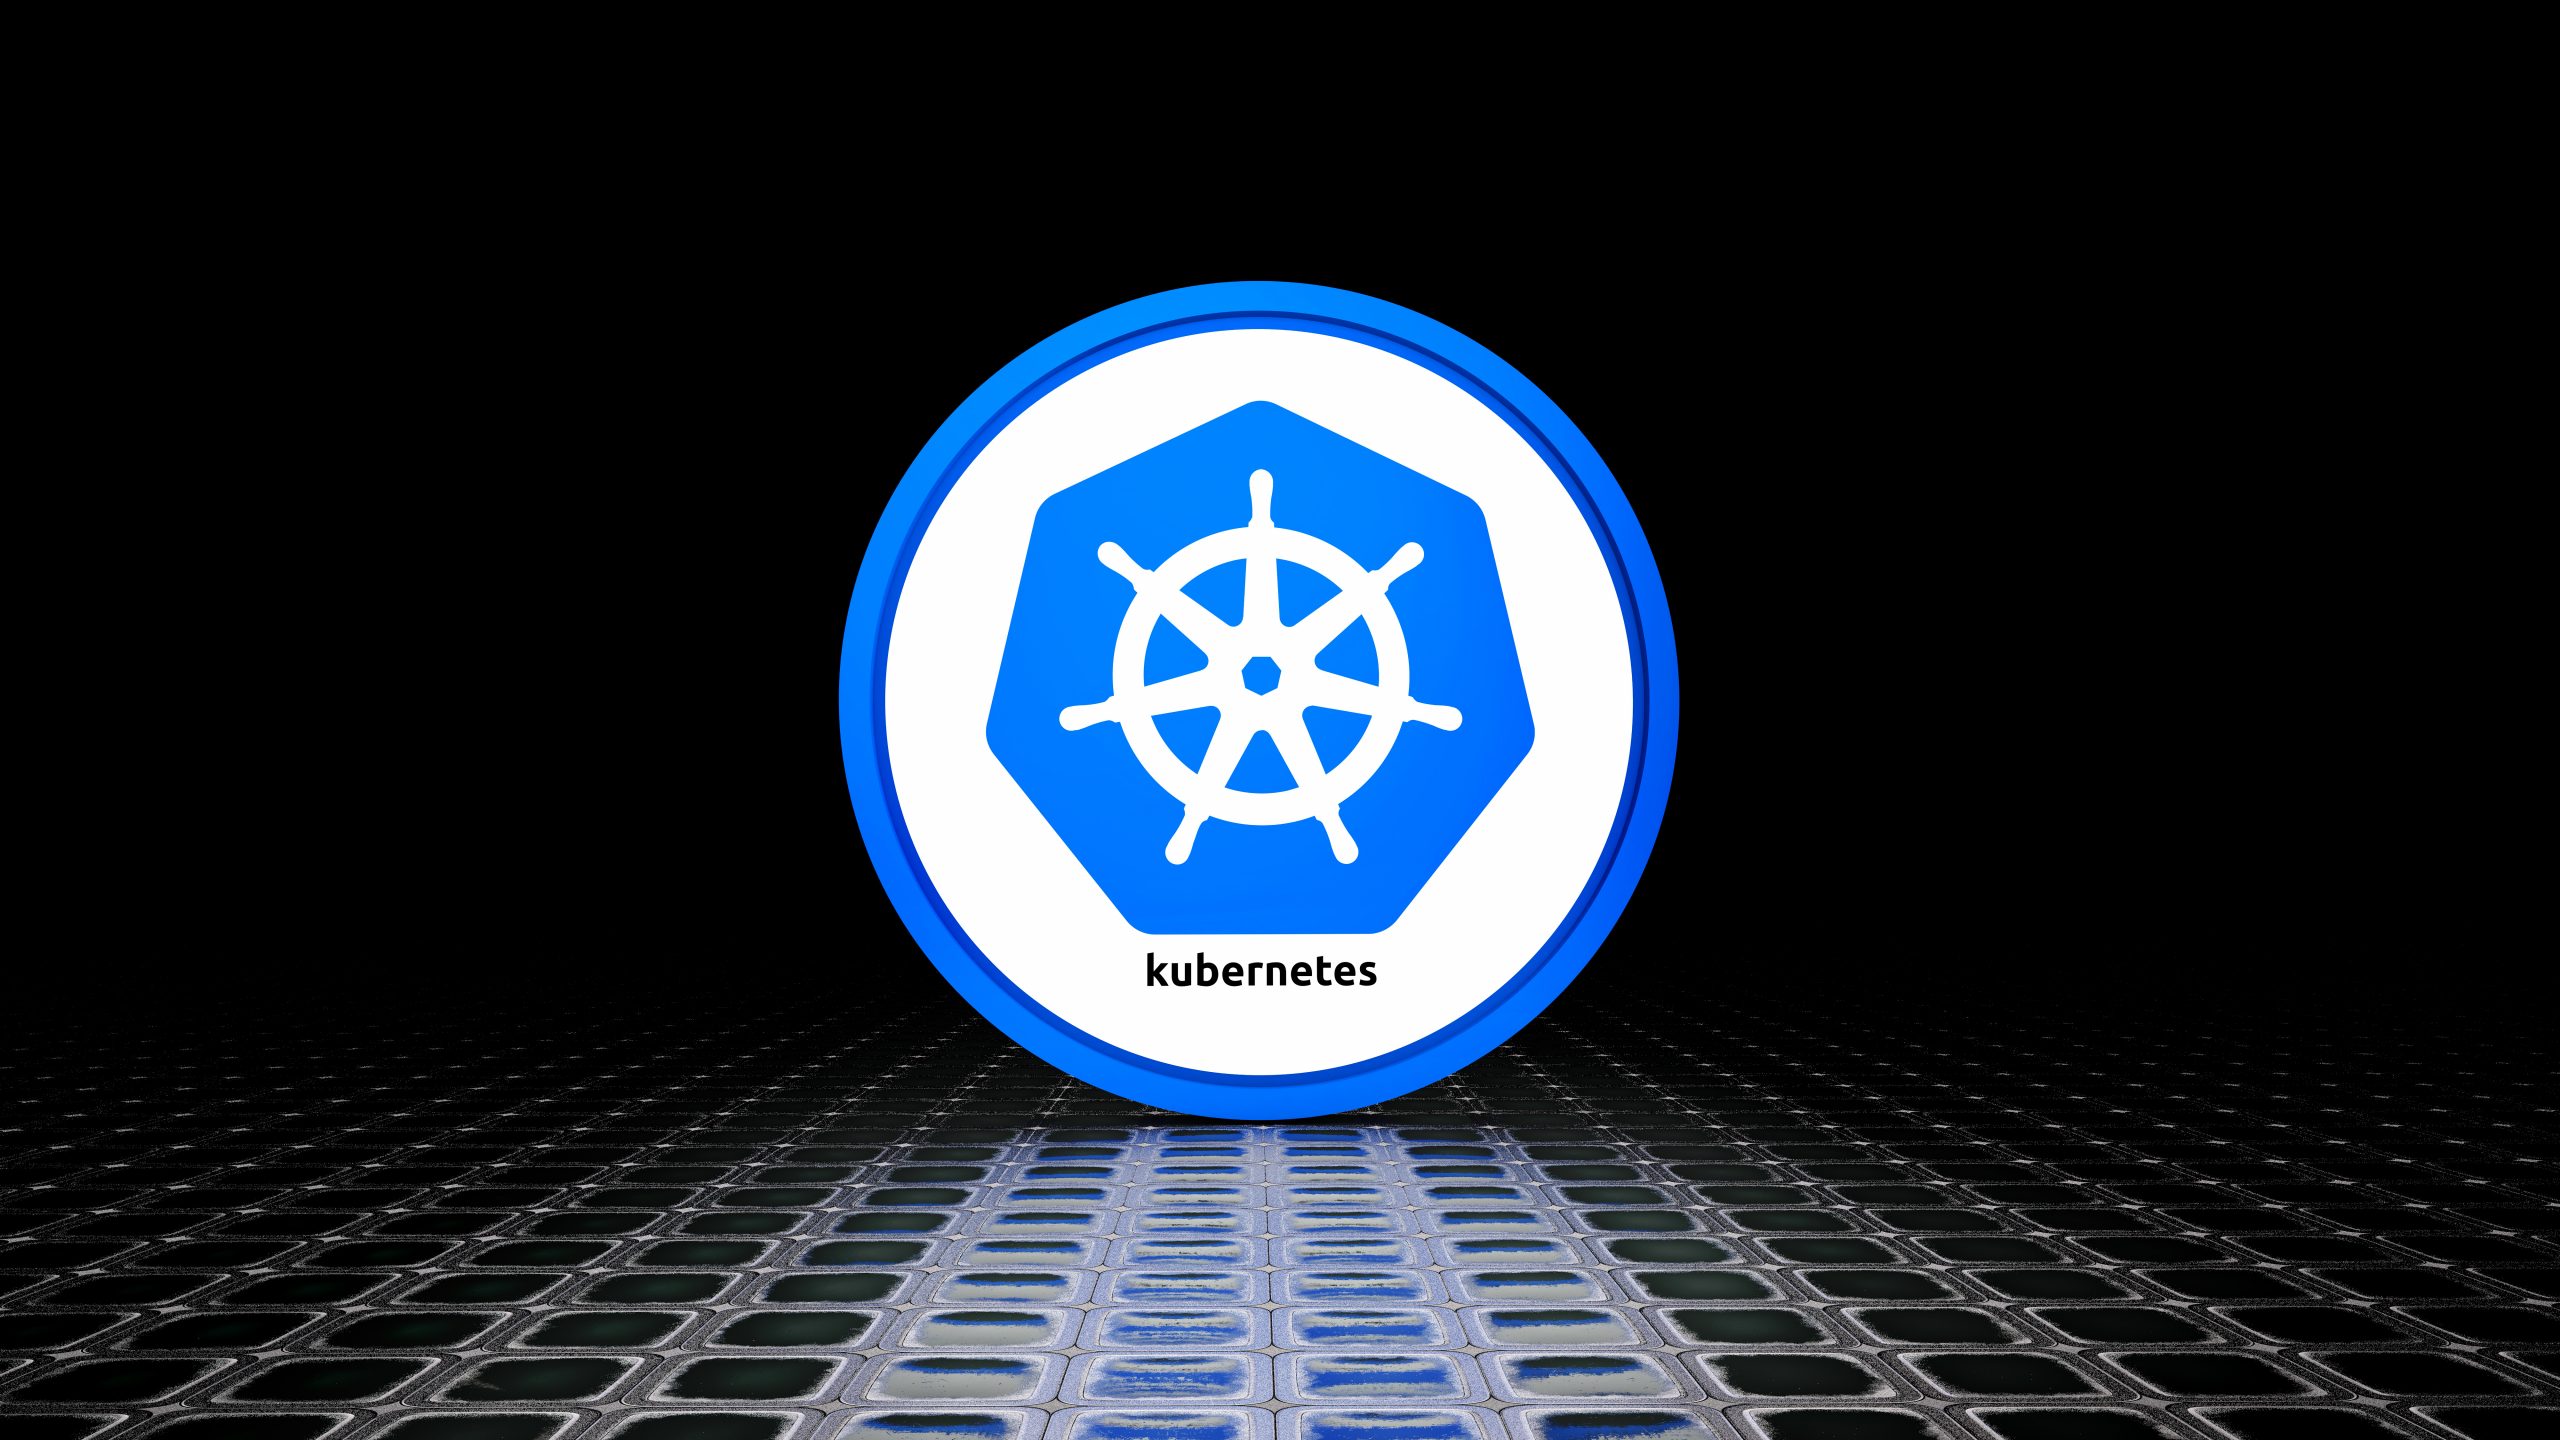 Blue and white Kubernetes logo on a dark grid background with a hexagonal steering wheel symbol at the center, representing container orchestration and cloud-native applications.